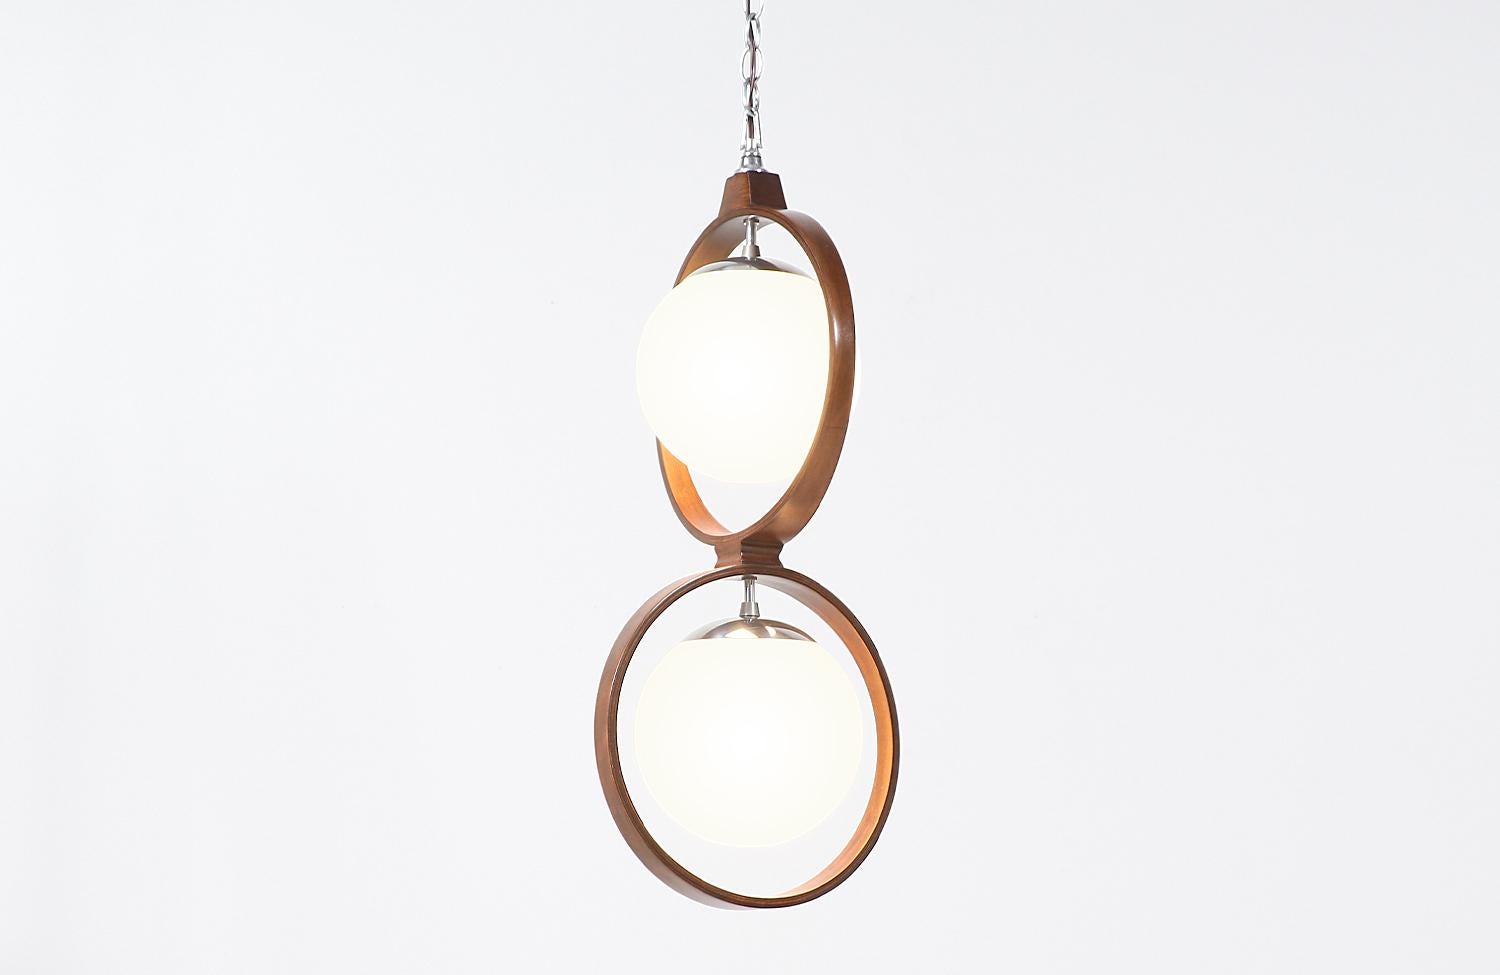 Dazzling Mid-Century Modern pendant chandelier designed by Arthur Jacobs for Modeline in the United States, circa 1970s. This expertly crafted walnut bentwood pendant features two wooden rings with its original frosted glass globes hanging from a